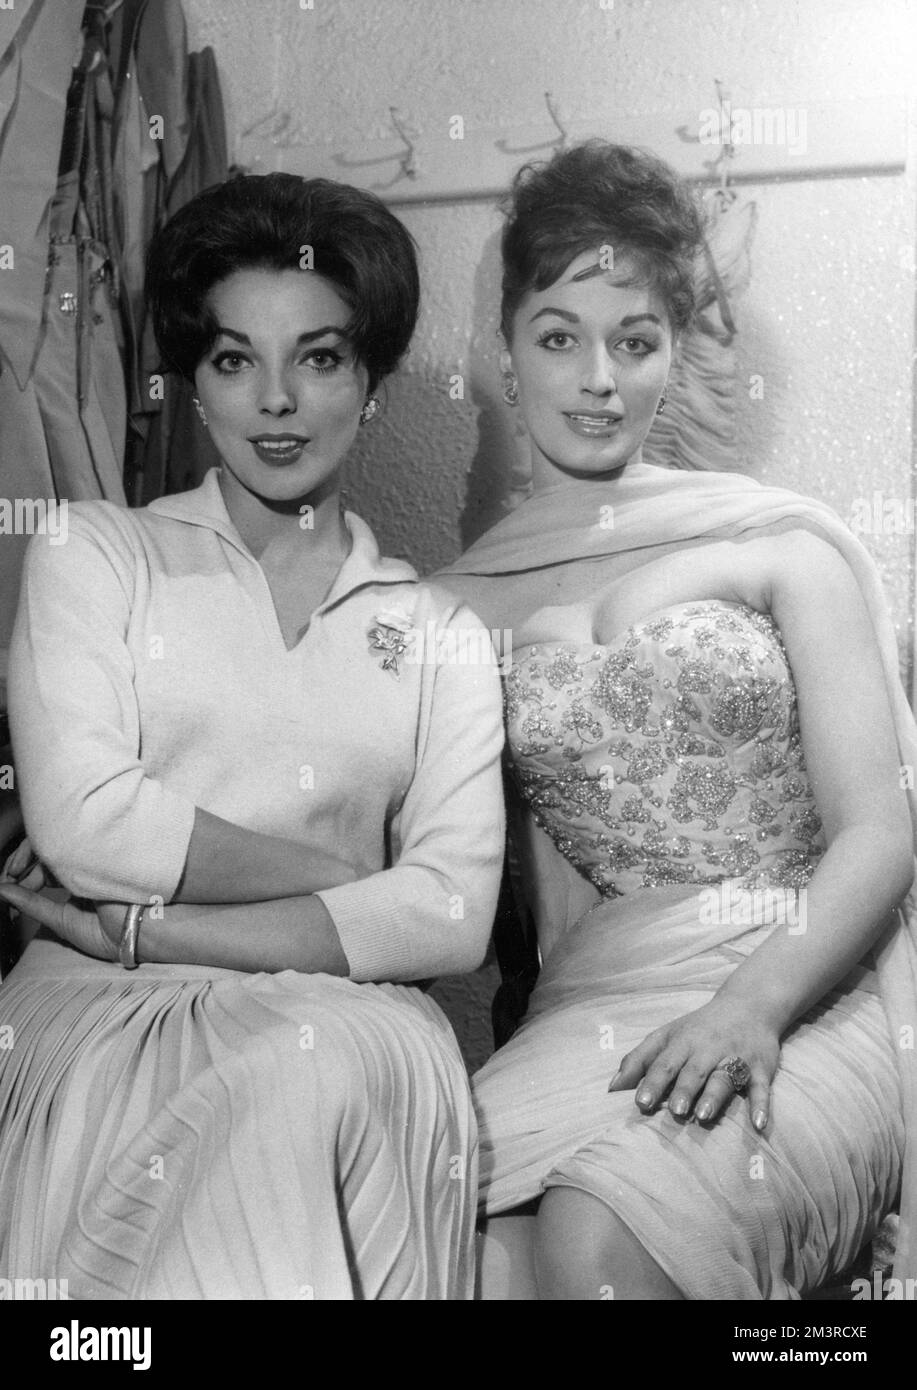 Joan Collins, actress (born 1933), together with her sister Jackie Collins, novelist (1937-2015), c.1955     Date: 1950s Stock Photo